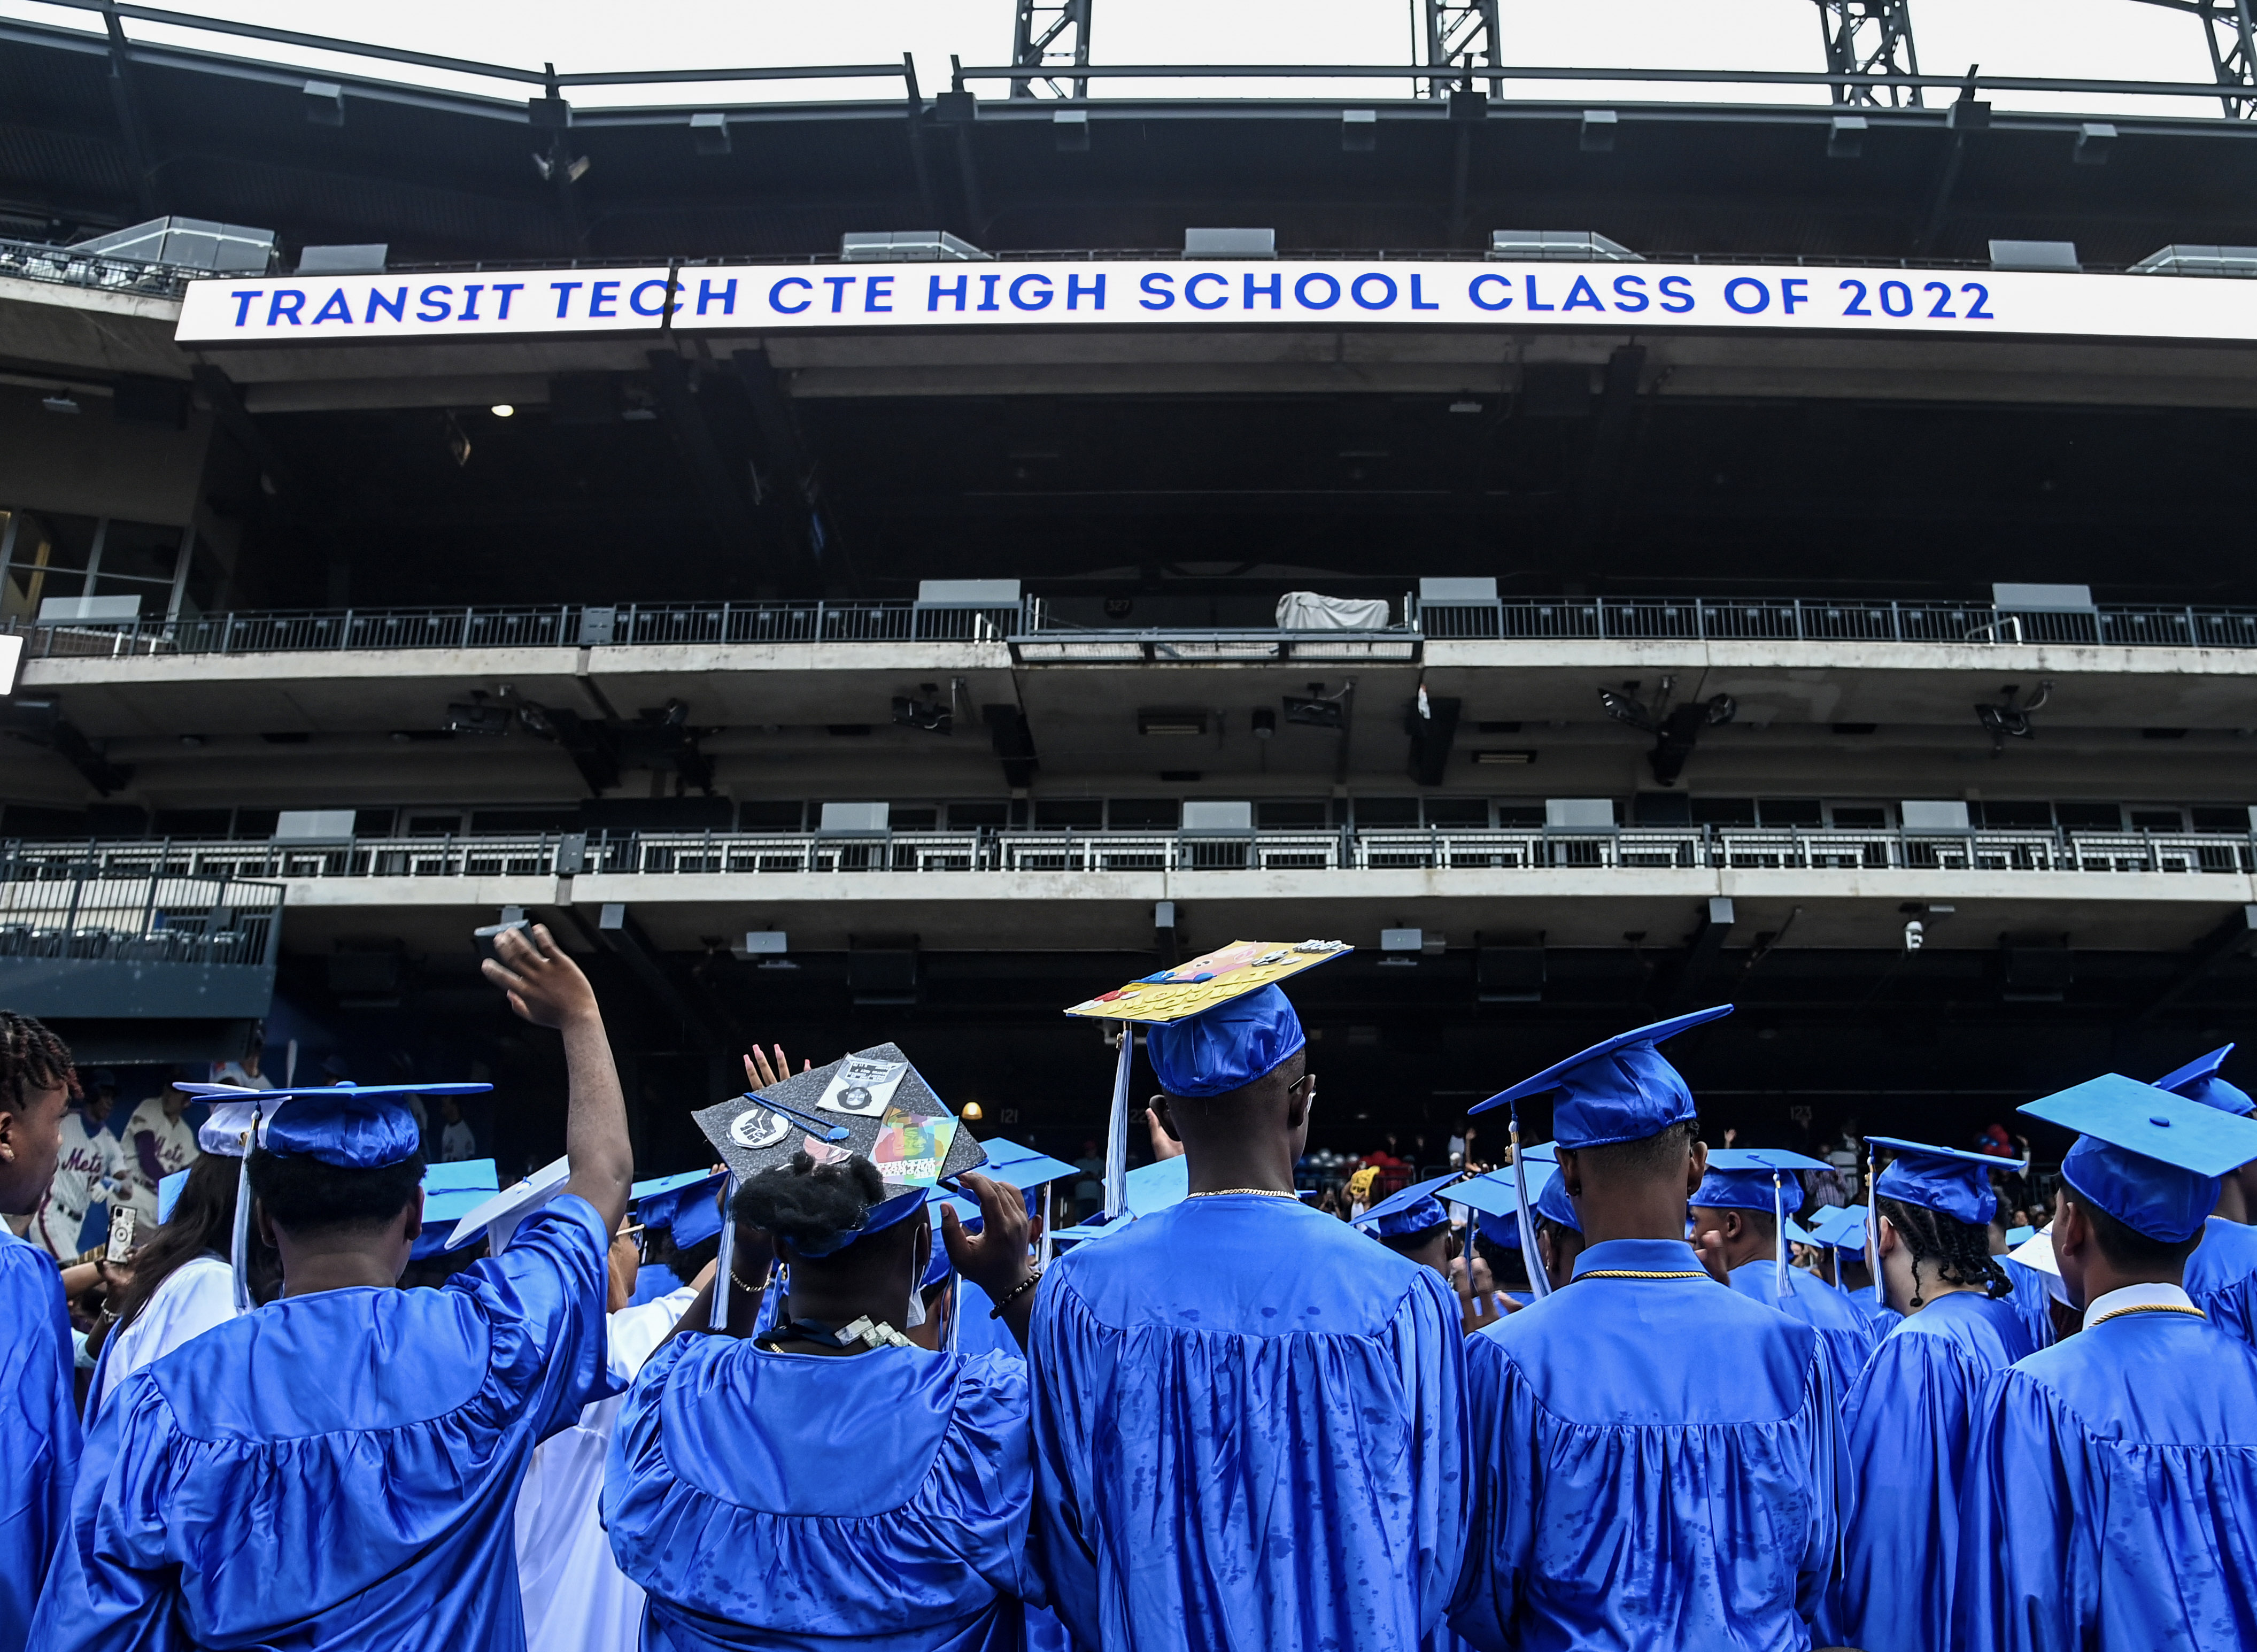 PHOTOS: MTA Chair and CEO Lieber Delivers Transit Tech High School Commencement Speech 